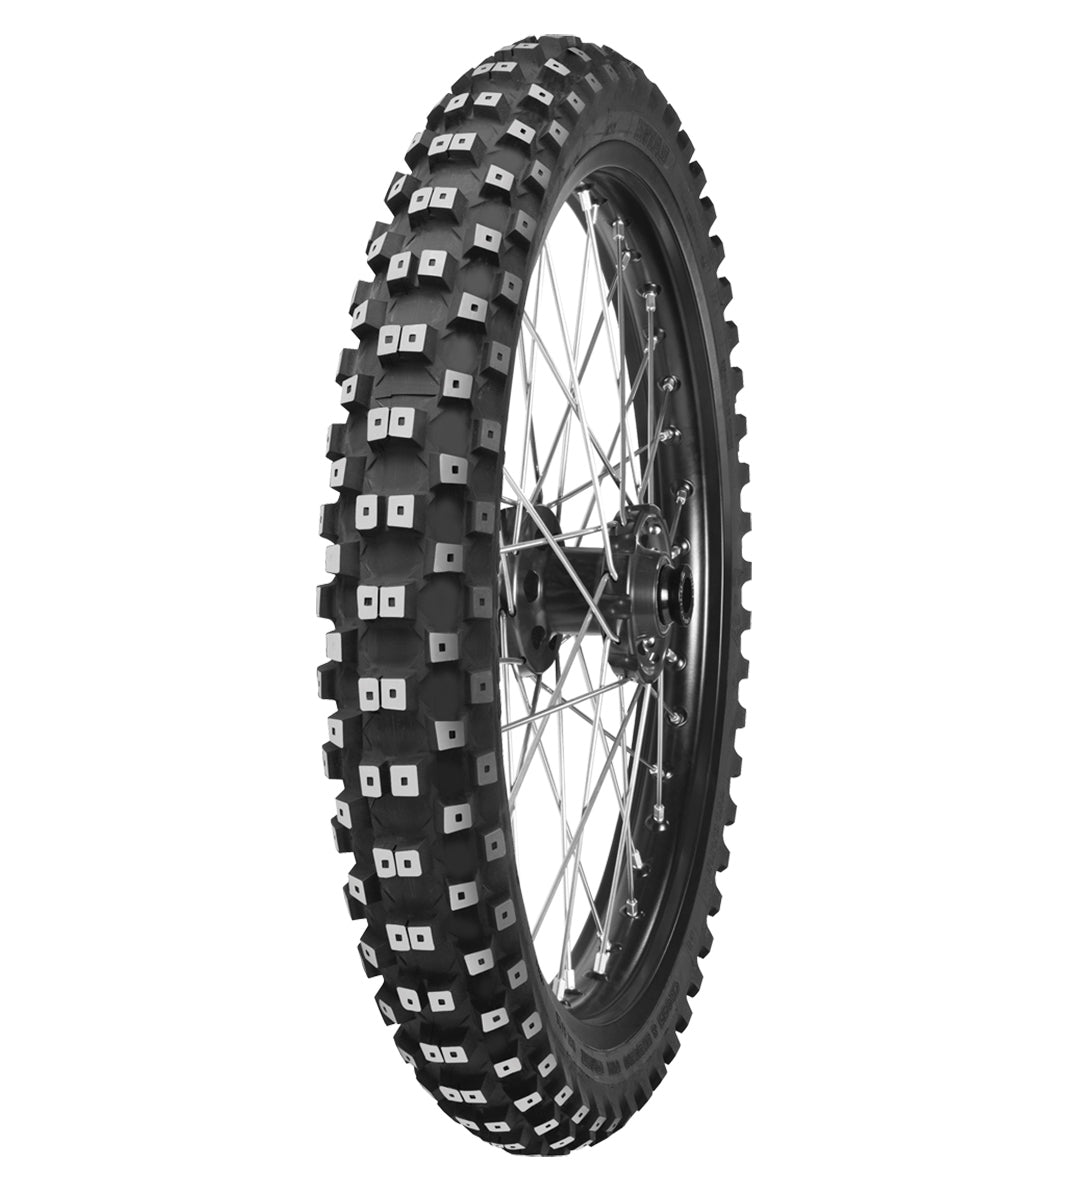 Mitas C-17 STONEATER 90/90-21 All-Terrain Off-Road 54R No Stripe Tube Front Tire, 226708, 90/90-21, All-Terrain, C-17 StonEater, Front, Off-Road, Tires - Imported and distributed in North & South America by Lindeco Genuine Powersports - Premier Powersports Equipment and Accessories for Motorcycle Enthusiasts, Professional Riders and Dealers.